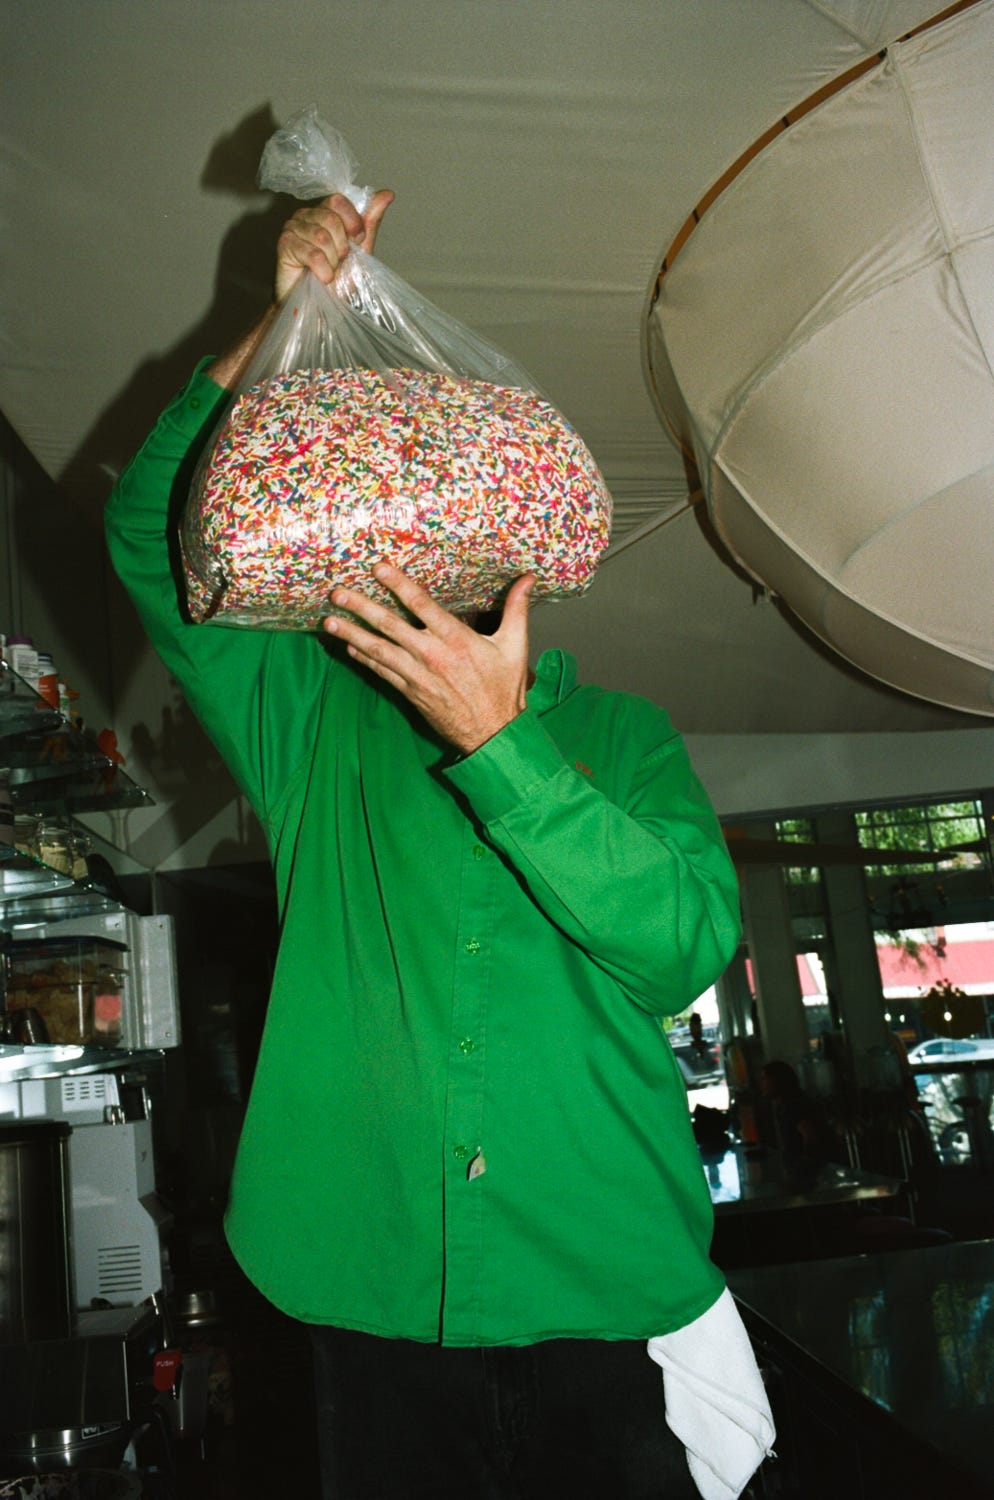 Fisher holds a bag of sprinkles